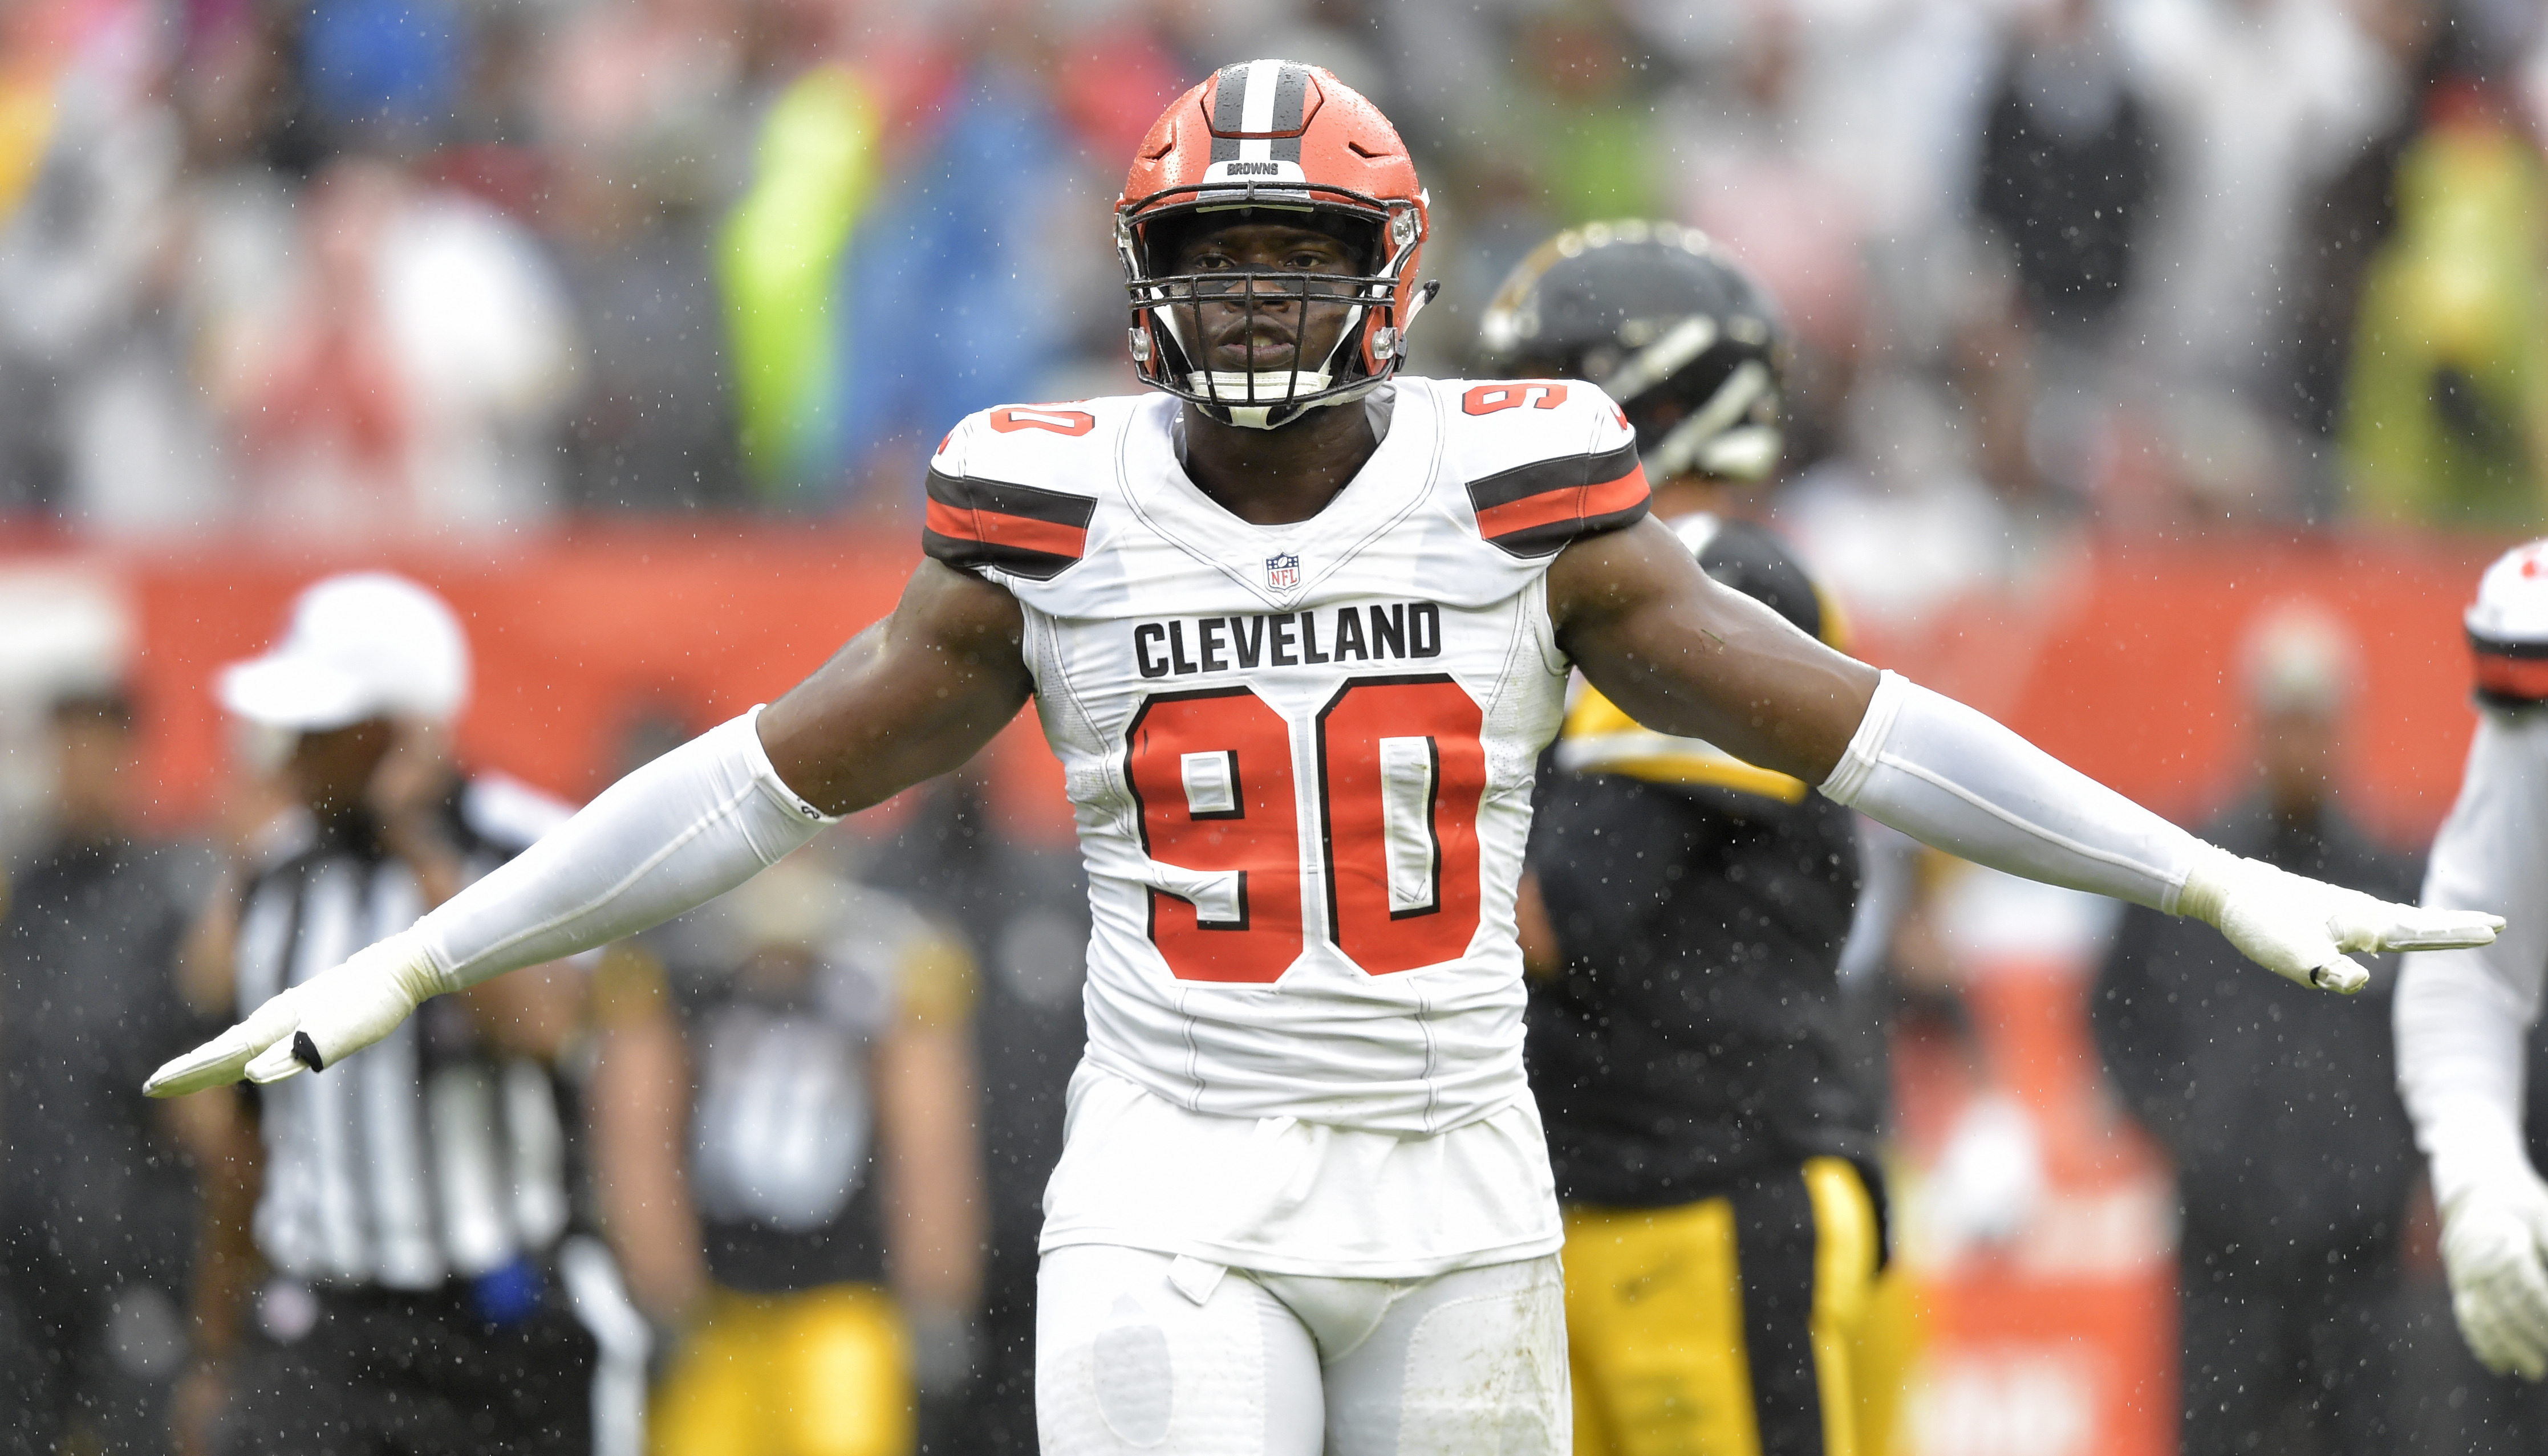 Browns' DE Ogbah dealing with sprained left ankle